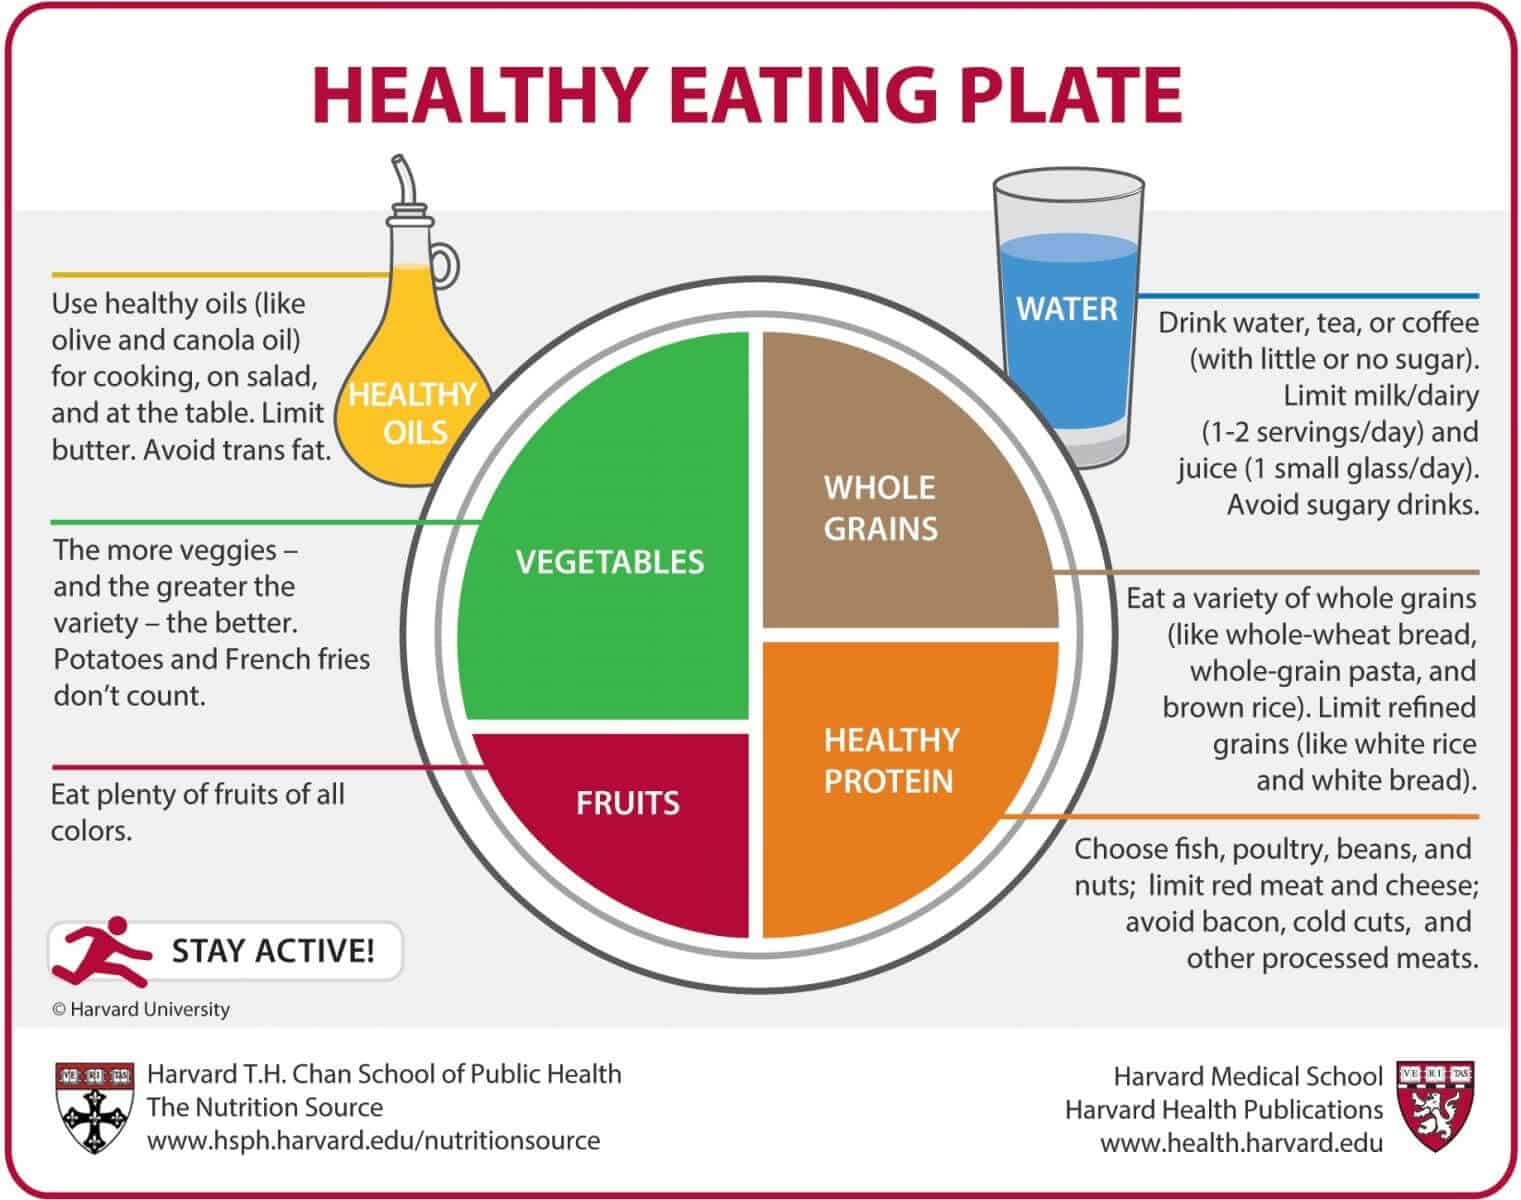 Healthy eating plate - Dr. Axe